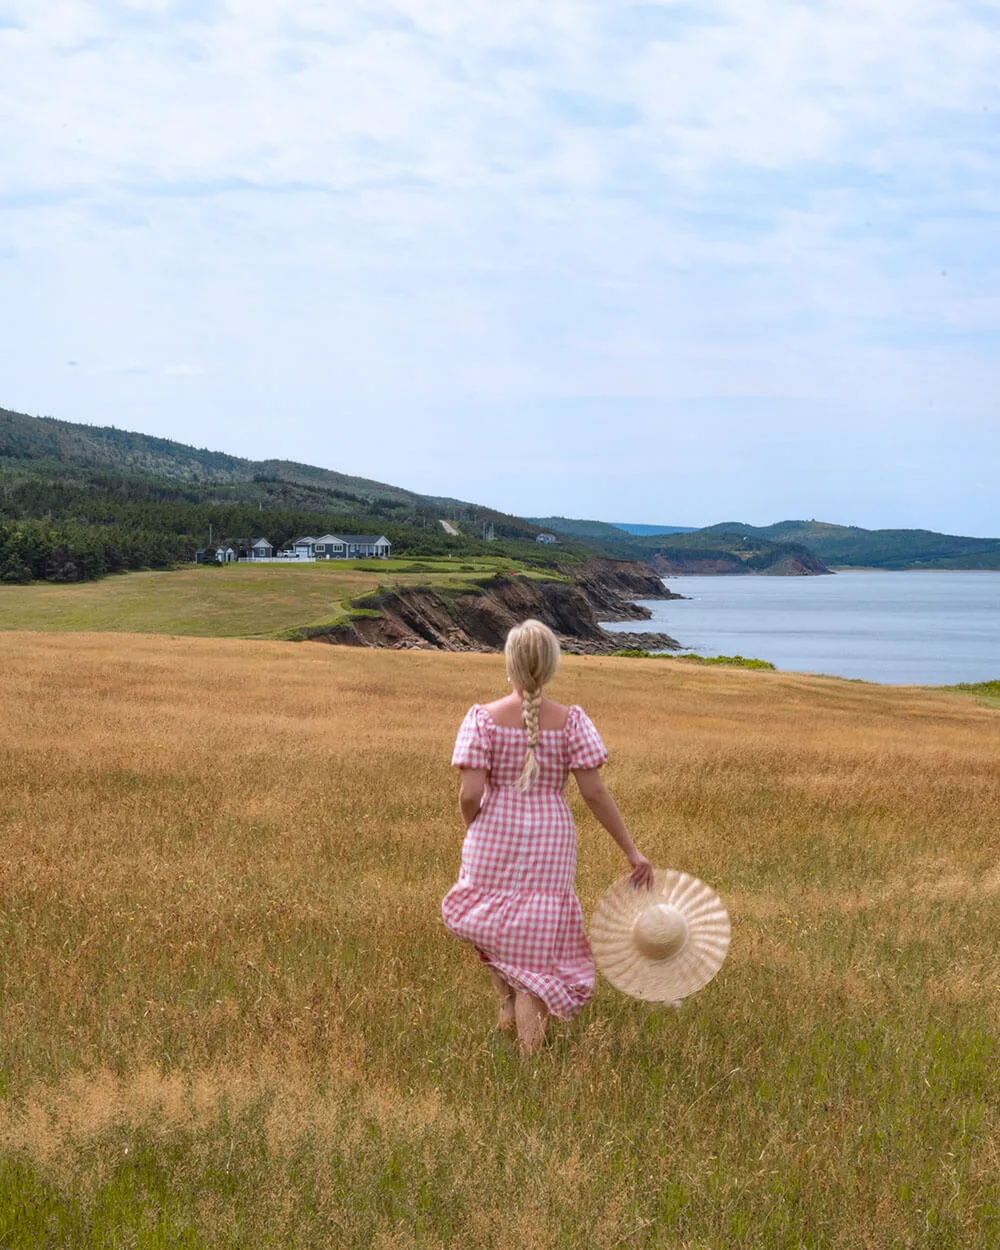 Planning a trip to Cape Breton soon? This guide includes all of the best things to do in Cape Breton Island! From activities and attractions, to the top restaurants, hikes, and all the things you'll want to see along the famous Cabot Trial. You won't want to miss this guide that will help you plan the perfect getaway to Cape Breton. Click for the full list. Pictured here: Take in the views at Whale Cove